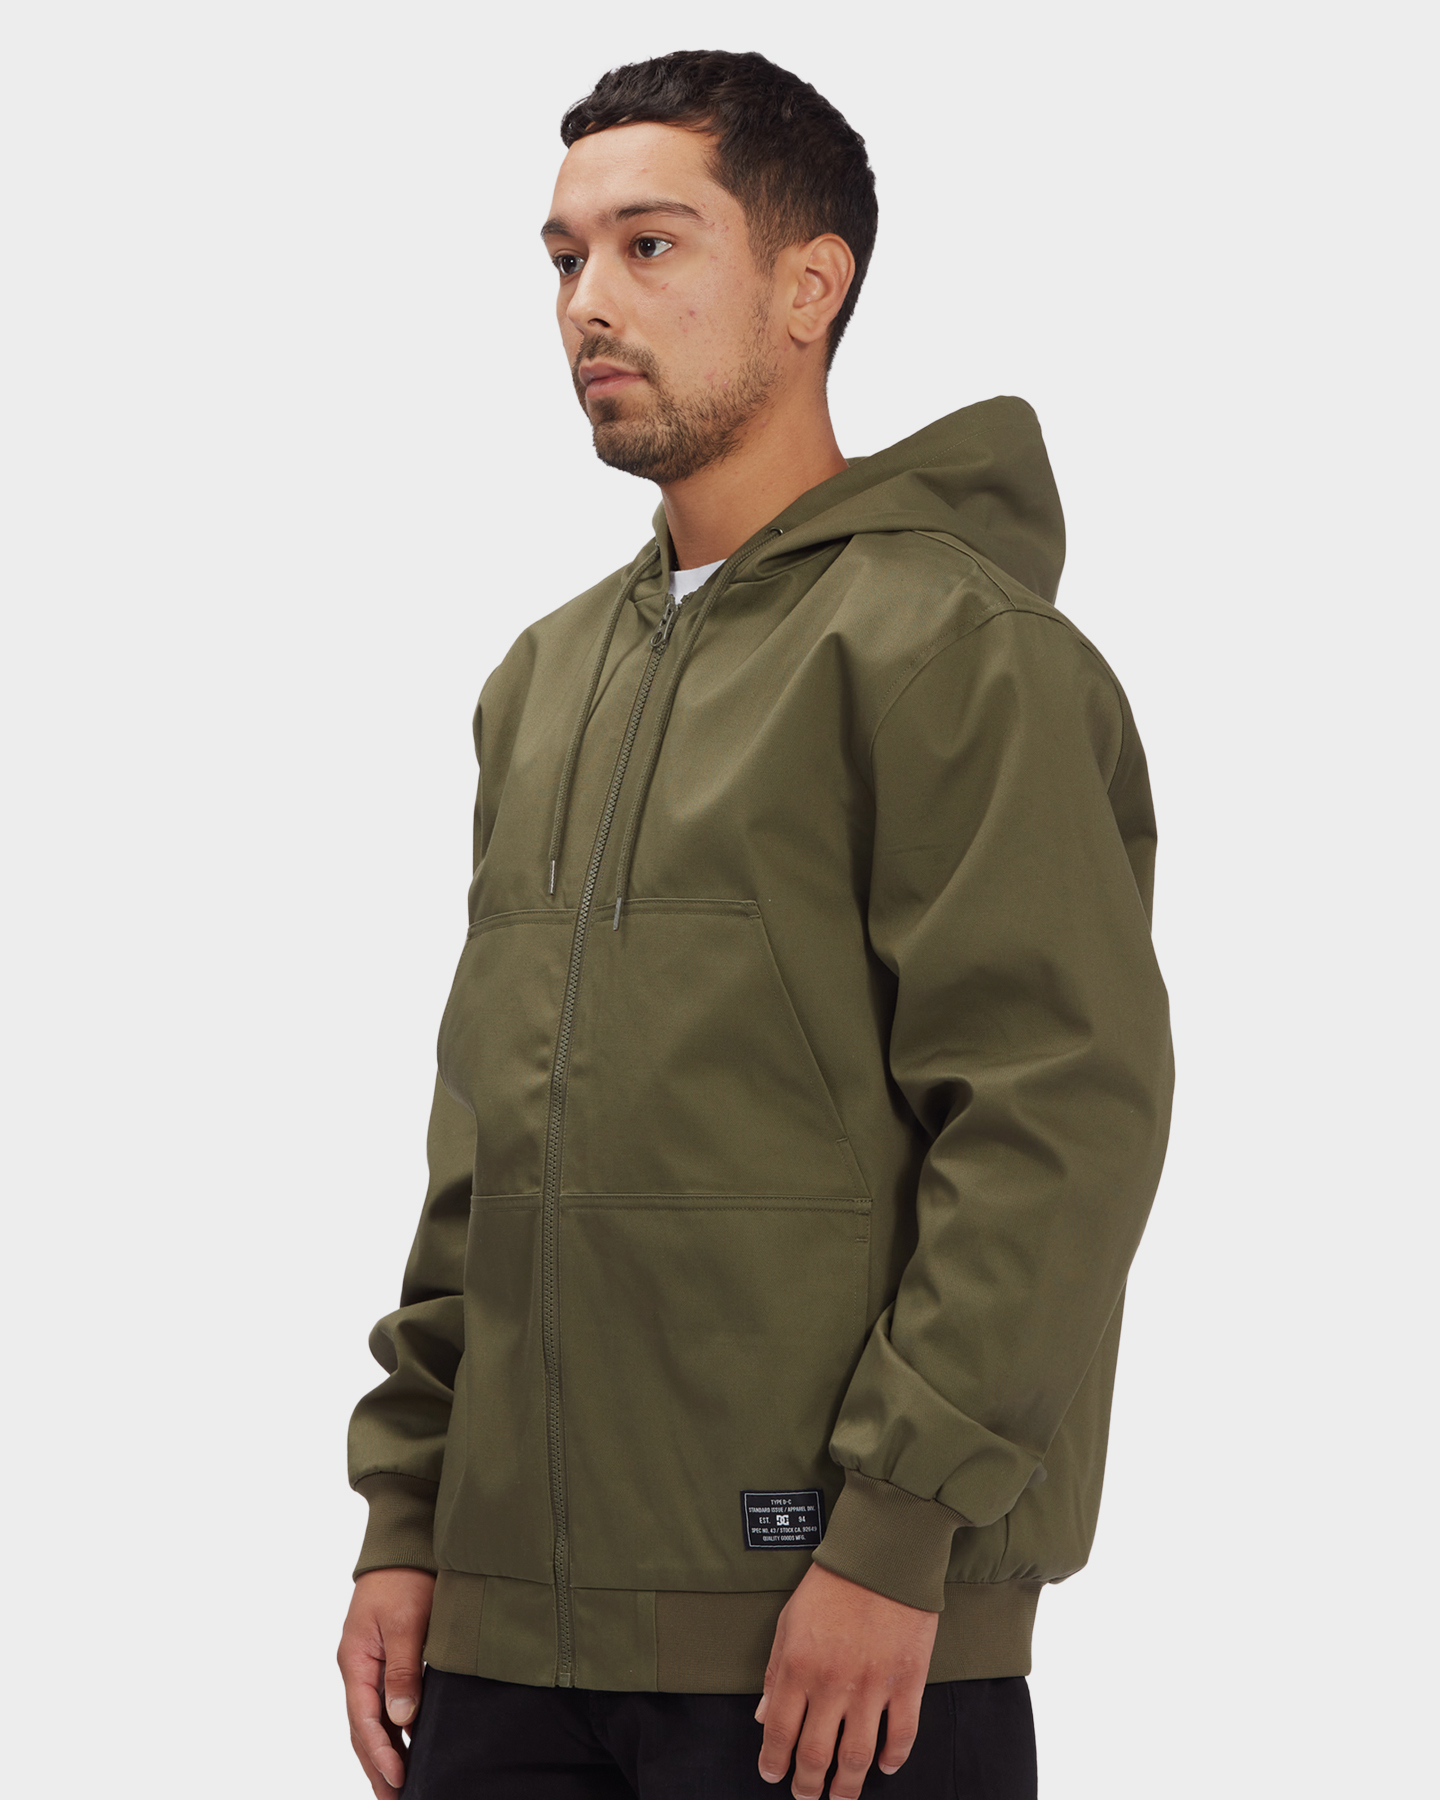 Dc Shoes Men's Rowdy Jacket Light - Ivy Green | SurfStitch